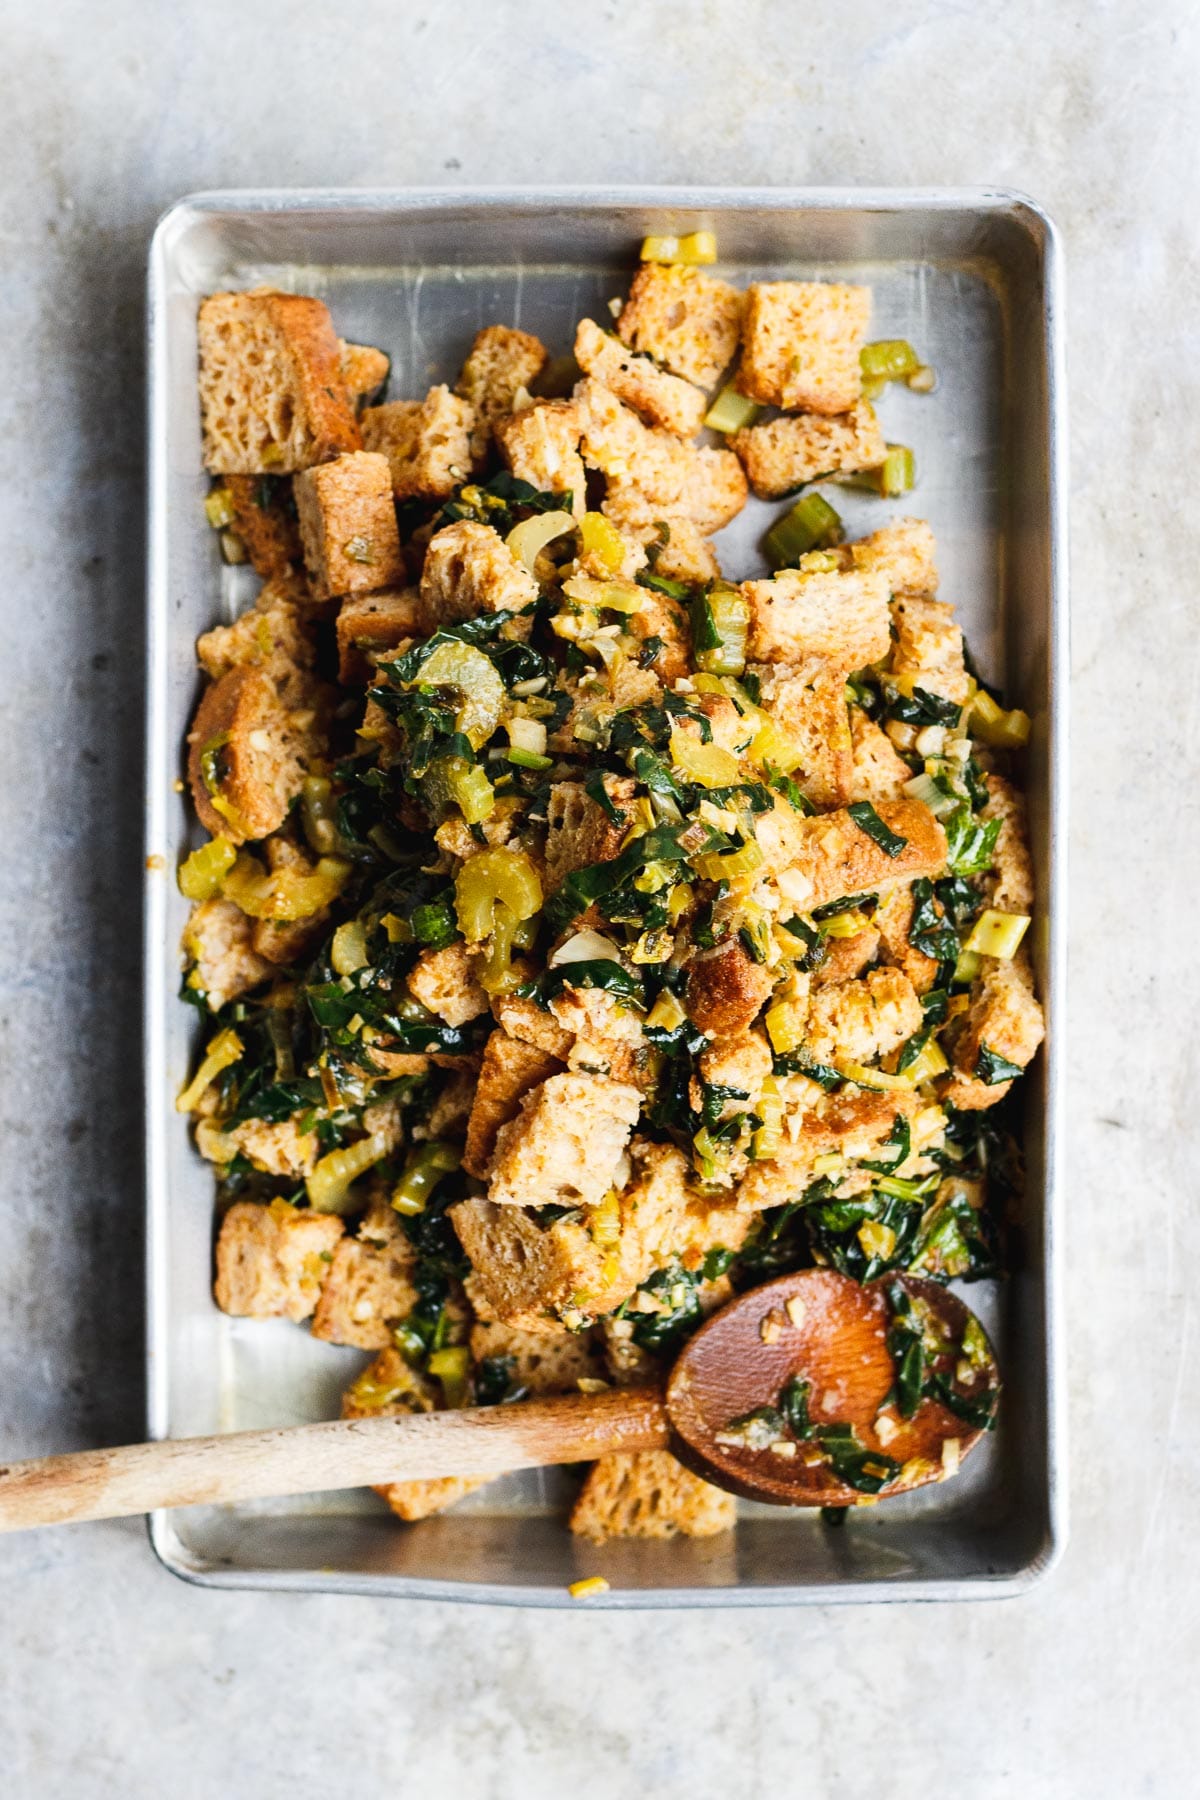 SAGE STUFFING WITH KALE AND CELERY